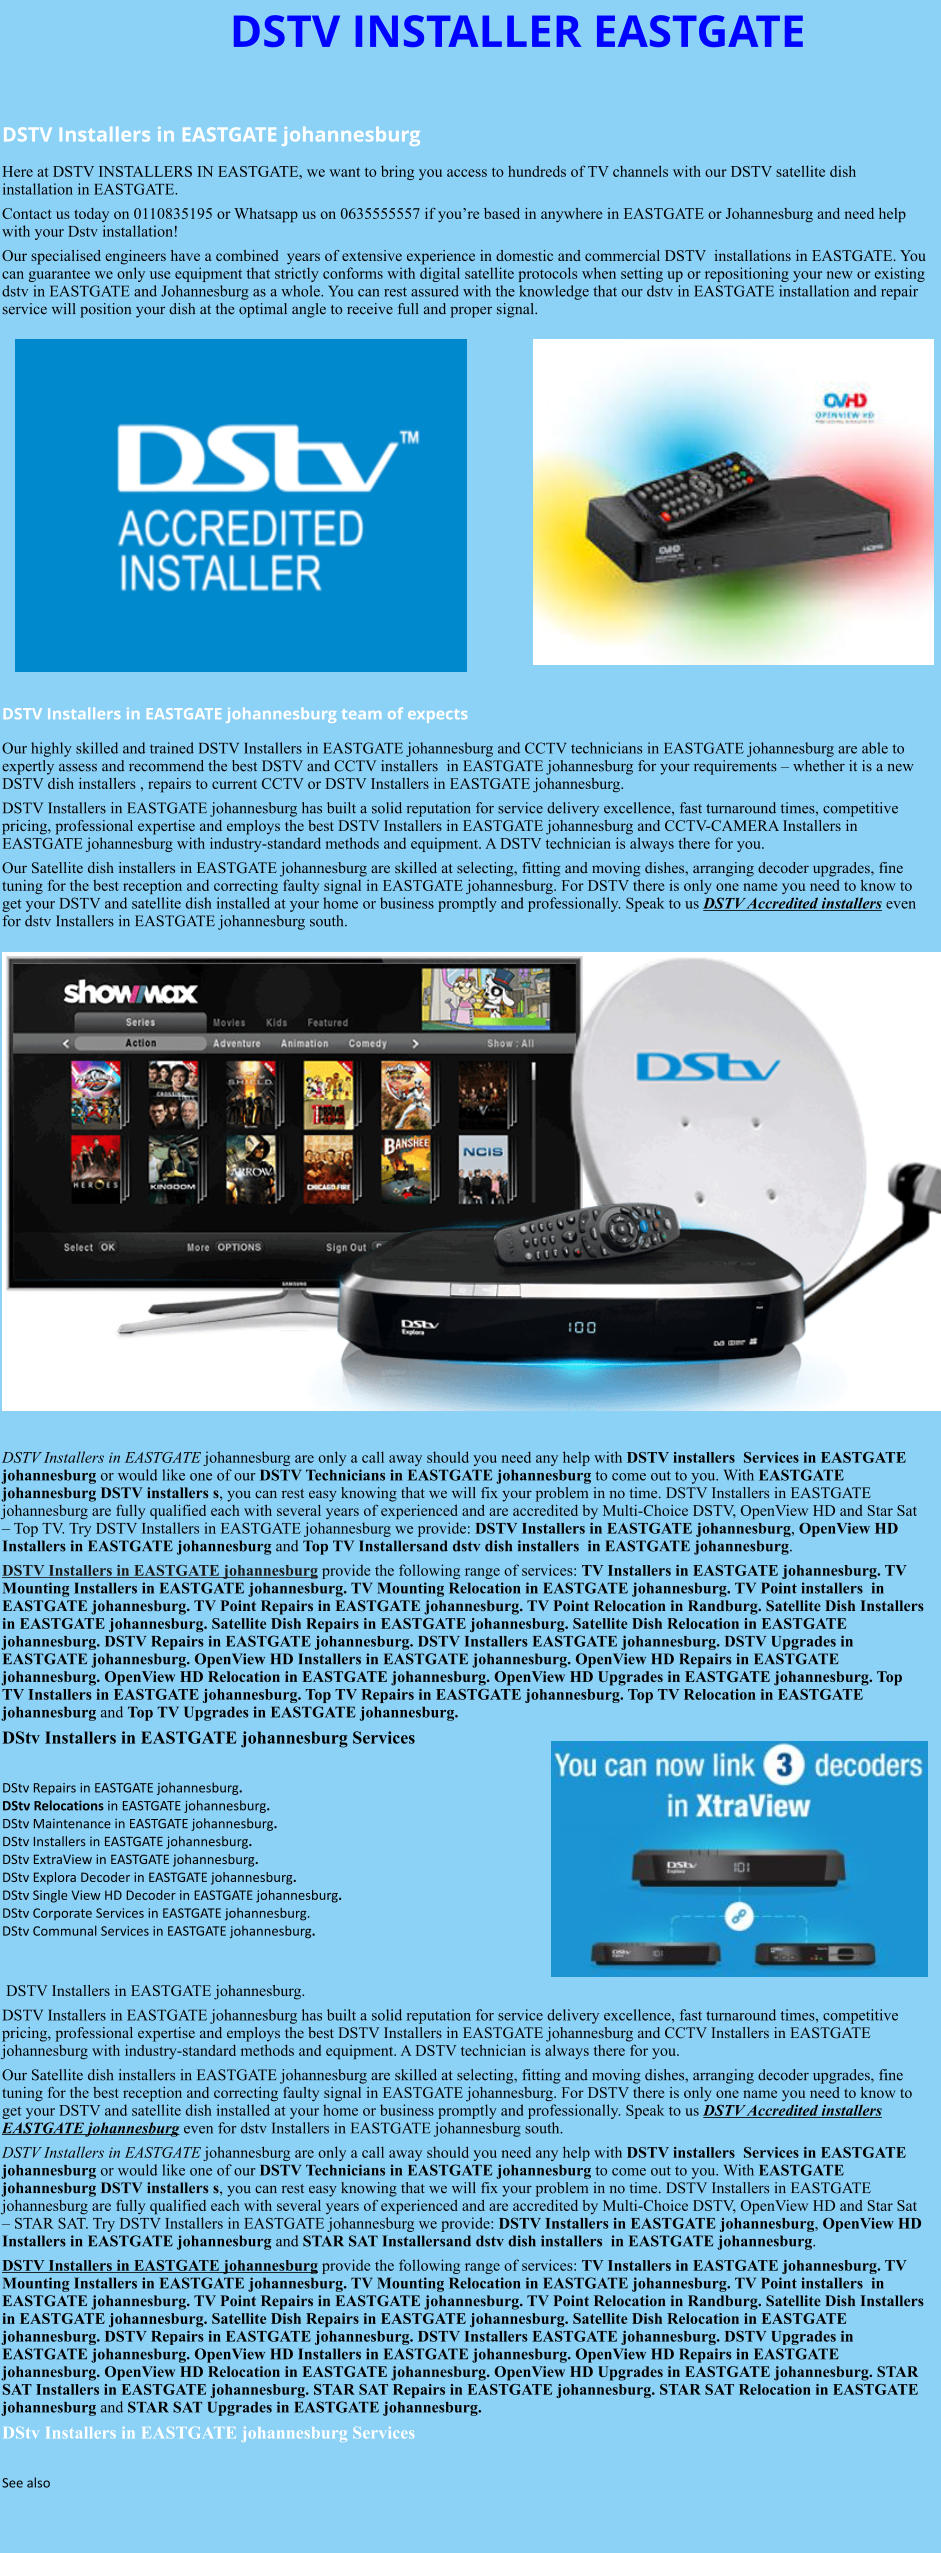 DSTV INSTALLER EASTGATE  DSTV Installers in EASTGATE johannesburg  Here at DSTV INSTALLERS IN EASTGATE, we want to bring you access to hundreds of TV channels with our DSTV satellite dish installation in EASTGATE. Contact us today on 0110835195 or Whatsapp us on 0635555557 if you’re based in anywhere in EASTGATE or Johannesburg and need help with your Dstv installation! Our specialised engineers have a combined  years of extensive experience in domestic and commercial DSTV  installations in EASTGATE. You can guarantee we only use equipment that strictly conforms with digital satellite protocols when setting up or repositioning your new or existing dstv in EASTGATE and Johannesburg as a whole. You can rest assured with the knowledge that our dstv in EASTGATE installation and repair service will position your dish at the optimal angle to receive full and proper signal.                DSTV Installers in EASTGATE johannesburg team of expects Our highly skilled and trained DSTV Installers in EASTGATE johannesburg and CCTV technicians in EASTGATE johannesburg are able to expertly assess and recommend the best DSTV and CCTV installers  in EASTGATE johannesburg for your requirements – whether it is a new DSTV dish installers , repairs to current CCTV or DSTV Installers in EASTGATE johannesburg. DSTV Installers in EASTGATE johannesburg has built a solid reputation for service delivery excellence, fast turnaround times, competitive pricing, professional expertise and employs the best DSTV Installers in EASTGATE johannesburg and CCTV-CAMERA Installers in EASTGATE johannesburg with industry-standard methods and equipment. A DSTV technician is always there for you. Our Satellite dish installers in EASTGATE johannesburg are skilled at selecting, fitting and moving dishes, arranging decoder upgrades, fine tuning for the best reception and correcting faulty signal in EASTGATE johannesburg. For DSTV there is only one name you need to know to get your DSTV and satellite dish installed at your home or business promptly and professionally. Speak to us DSTV Accredited installers even for dstv Installers in EASTGATE johannesburg south.                      DSTV Installers in EASTGATE johannesburg are only a call away should you need any help with DSTV installers  Services in EASTGATE johannesburg or would like one of our DSTV Technicians in EASTGATE johannesburg to come out to you. With EASTGATE johannesburg DSTV installers s, you can rest easy knowing that we will fix your problem in no time. DSTV Installers in EASTGATE johannesburg are fully qualified each with several years of experienced and are accredited by Multi-Choice DSTV, OpenView HD and Star Sat – Top TV. Try DSTV Installers in EASTGATE johannesburg we provide: DSTV Installers in EASTGATE johannesburg, OpenView HD Installers in EASTGATE johannesburg and Top TV Installersand dstv dish installers  in EASTGATE johannesburg. DSTV Installers in EASTGATE johannesburg provide the following range of services: TV Installers in EASTGATE johannesburg. TV Mounting Installers in EASTGATE johannesburg. TV Mounting Relocation in EASTGATE johannesburg. TV Point installers  in EASTGATE johannesburg. TV Point Repairs in EASTGATE johannesburg. TV Point Relocation in Randburg. Satellite Dish Installers in EASTGATE johannesburg. Satellite Dish Repairs in EASTGATE johannesburg. Satellite Dish Relocation in EASTGATE johannesburg. DSTV Repairs in EASTGATE johannesburg. DSTV Installers EASTGATE johannesburg. DSTV Upgrades in EASTGATE johannesburg. OpenView HD Installers in EASTGATE johannesburg. OpenView HD Repairs in EASTGATE johannesburg. OpenView HD Relocation in EASTGATE johannesburg. OpenView HD Upgrades in EASTGATE johannesburg. Top TV Installers in EASTGATE johannesburg. Top TV Repairs in EASTGATE johannesburg. Top TV Relocation in EASTGATE johannesburg and Top TV Upgrades in EASTGATE johannesburg. DStv Installers in EASTGATE johannesburg Services  DStv Repairs in EASTGATE johannesburg.  DStv Relocations in EASTGATE johannesburg.  DStv Maintenance in EASTGATE johannesburg. DStv Installers in EASTGATE johannesburg. DStv ExtraView in EASTGATE johannesburg. DStv Explora Decoder in EASTGATE johannesburg. DStv Single View HD Decoder in EASTGATE johannesburg. DStv Corporate Services in EASTGATE johannesburg. DStv Communal Services in EASTGATE johannesburg.    DSTV Installers in EASTGATE johannesburg. DSTV Installers in EASTGATE johannesburg has built a solid reputation for service delivery excellence, fast turnaround times, competitive pricing, professional expertise and employs the best DSTV Installers in EASTGATE johannesburg and CCTV Installers in EASTGATE johannesburg with industry-standard methods and equipment. A DSTV technician is always there for you. Our Satellite dish installers in EASTGATE johannesburg are skilled at selecting, fitting and moving dishes, arranging decoder upgrades, fine tuning for the best reception and correcting faulty signal in EASTGATE johannesburg. For DSTV there is only one name you need to know to get your DSTV and satellite dish installed at your home or business promptly and professionally. Speak to us DSTV Accredited installers EASTGATE johannesburg even for dstv Installers in EASTGATE johannesburg south. DSTV Installers in EASTGATE johannesburg are only a call away should you need any help with DSTV installers  Services in EASTGATE johannesburg or would like one of our DSTV Technicians in EASTGATE johannesburg to come out to you. With EASTGATE johannesburg DSTV installers s, you can rest easy knowing that we will fix your problem in no time. DSTV Installers in EASTGATE johannesburg are fully qualified each with several years of experienced and are accredited by Multi-Choice DSTV, OpenView HD and Star Sat – STAR SAT. Try DSTV Installers in EASTGATE johannesburg we provide: DSTV Installers in EASTGATE johannesburg, OpenView HD Installers in EASTGATE johannesburg and STAR SAT Installersand dstv dish installers  in EASTGATE johannesburg. DSTV Installers in EASTGATE johannesburg provide the following range of services: TV Installers in EASTGATE johannesburg. TV Mounting Installers in EASTGATE johannesburg. TV Mounting Relocation in EASTGATE johannesburg. TV Point installers  in EASTGATE johannesburg. TV Point Repairs in EASTGATE johannesburg. TV Point Relocation in Randburg. Satellite Dish Installers in EASTGATE johannesburg. Satellite Dish Repairs in EASTGATE johannesburg. Satellite Dish Relocation in EASTGATE johannesburg. DSTV Repairs in EASTGATE johannesburg. DSTV Installers EASTGATE johannesburg. DSTV Upgrades in EASTGATE johannesburg. OpenView HD Installers in EASTGATE johannesburg. OpenView HD Repairs in EASTGATE johannesburg. OpenView HD Relocation in EASTGATE johannesburg. OpenView HD Upgrades in EASTGATE johannesburg. STAR SAT Installers in EASTGATE johannesburg. STAR SAT Repairs in EASTGATE johannesburg. STAR SAT Relocation in EASTGATE johannesburg and STAR SAT Upgrades in EASTGATE johannesburg. DStv Installers in EASTGATE johannesburg Services  See also